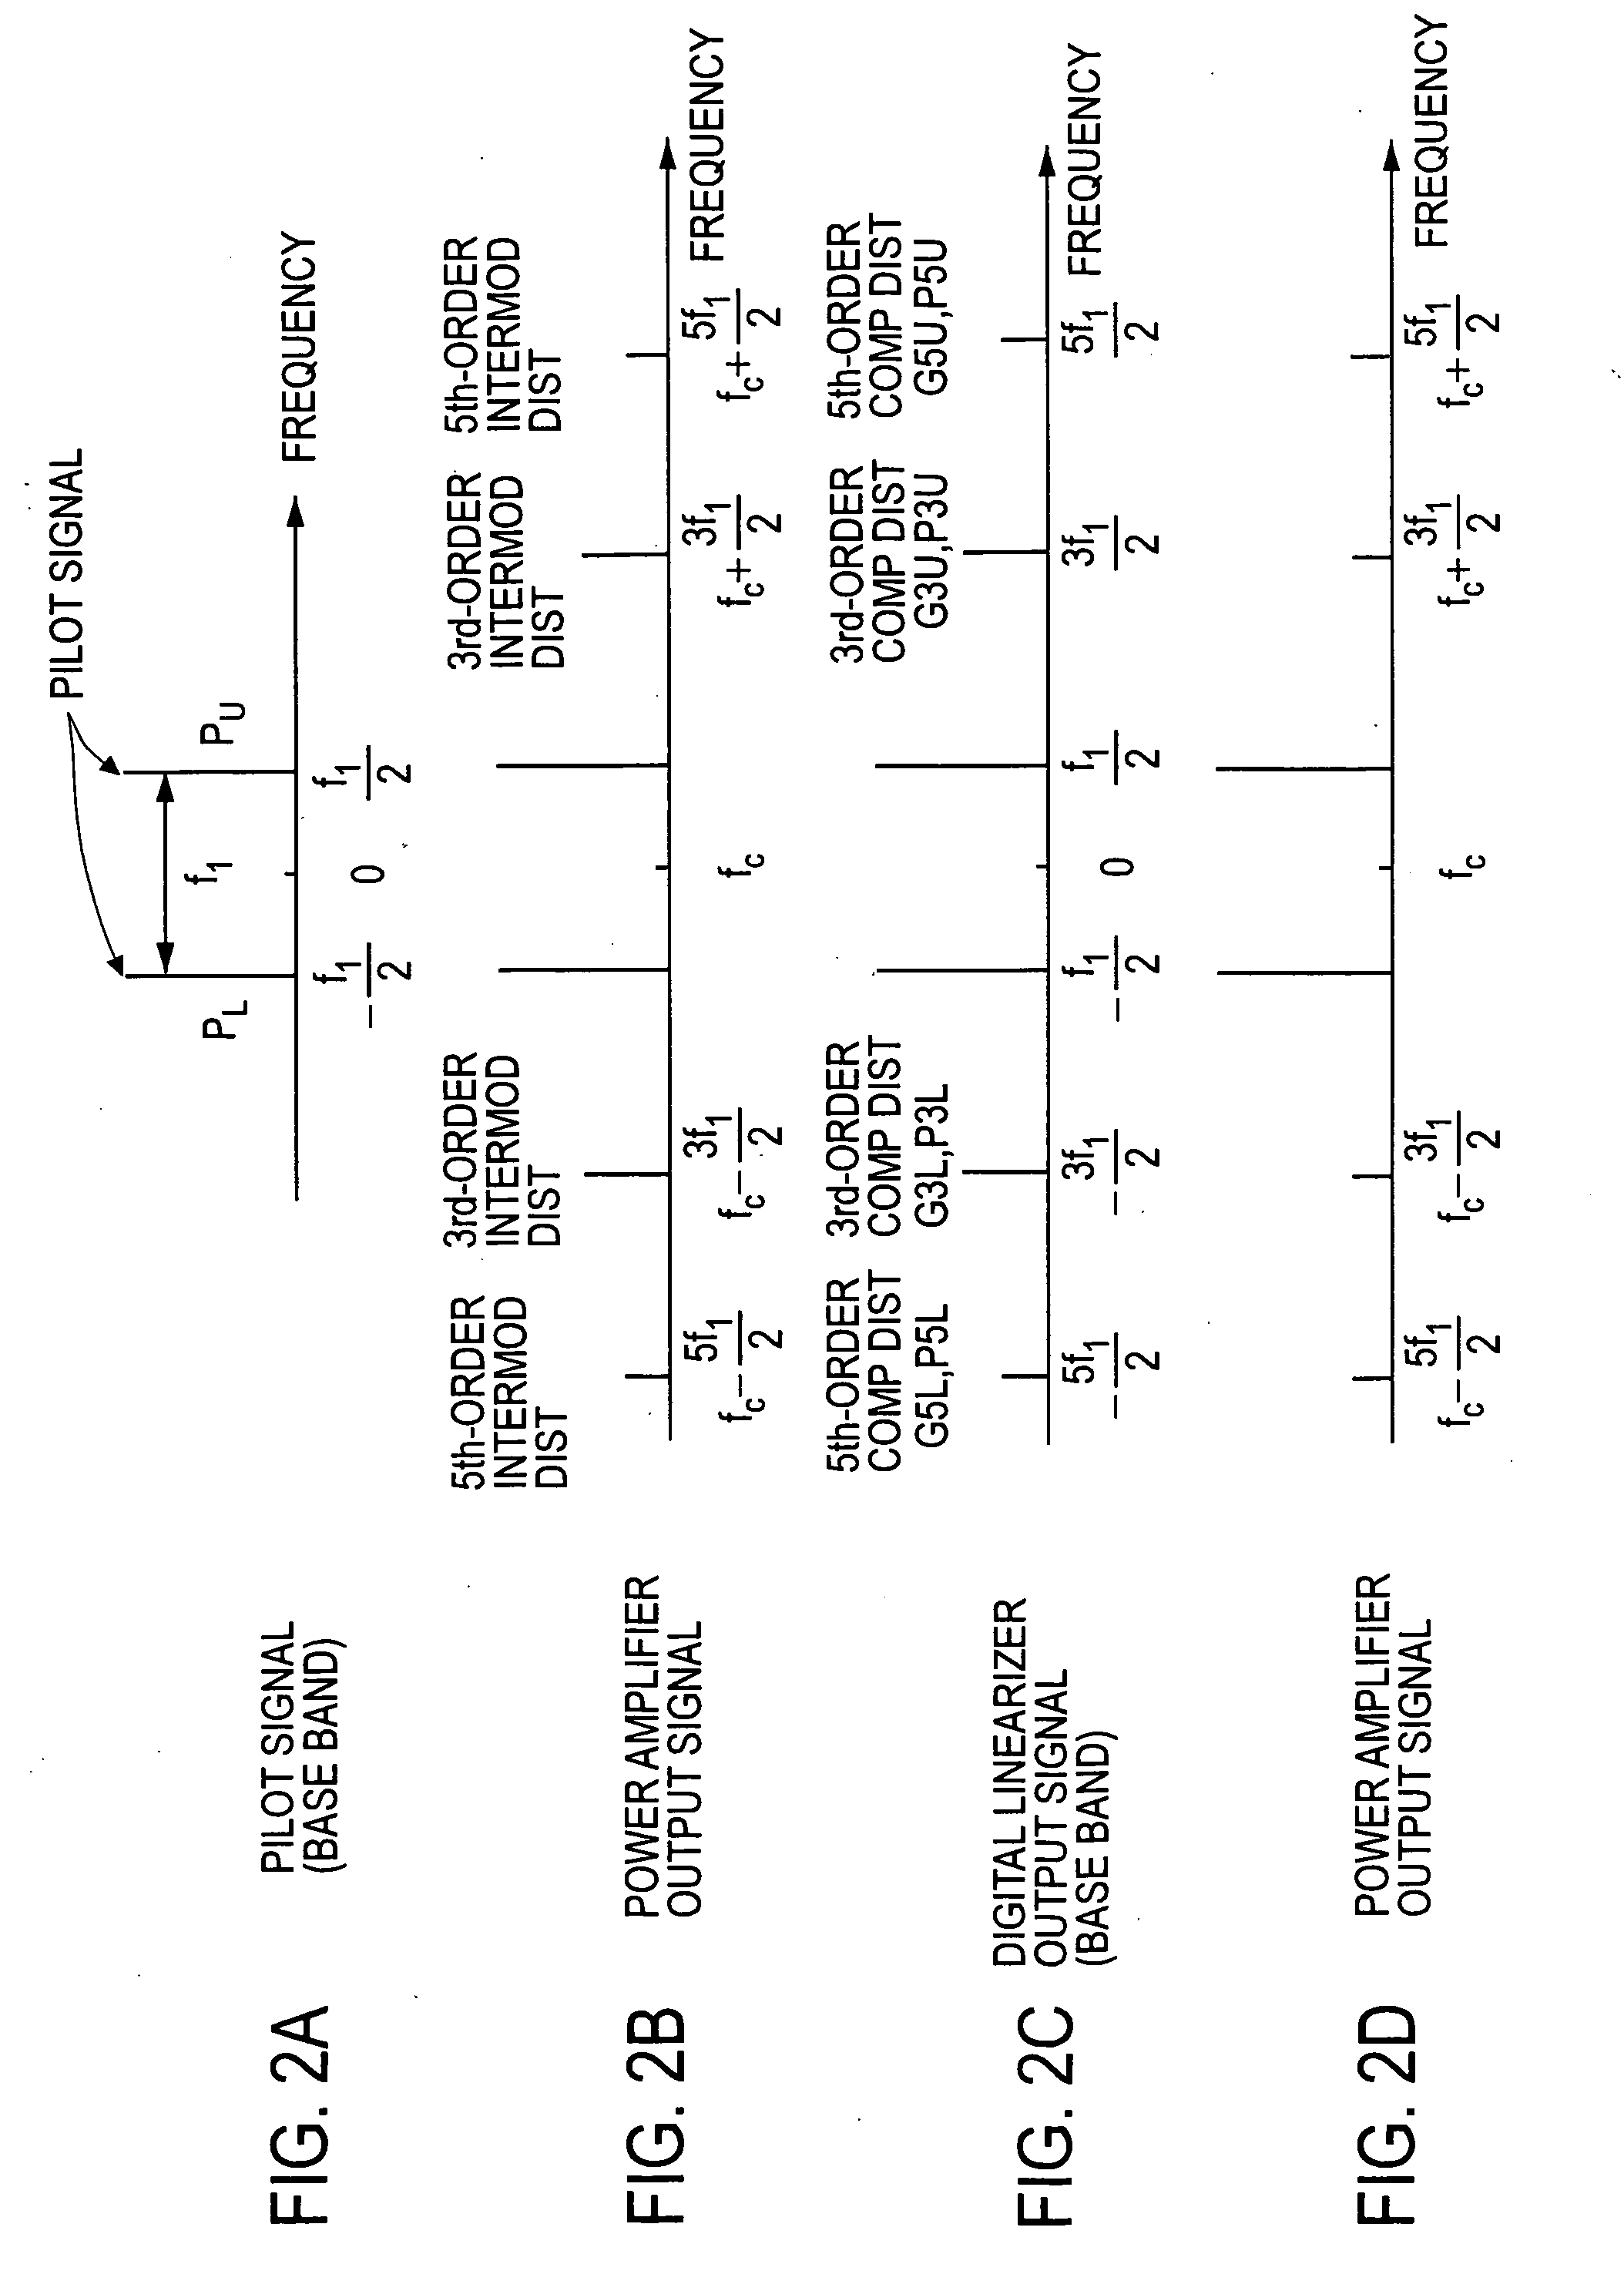 Method and apparatus for control of predistortion linearizer based on power series